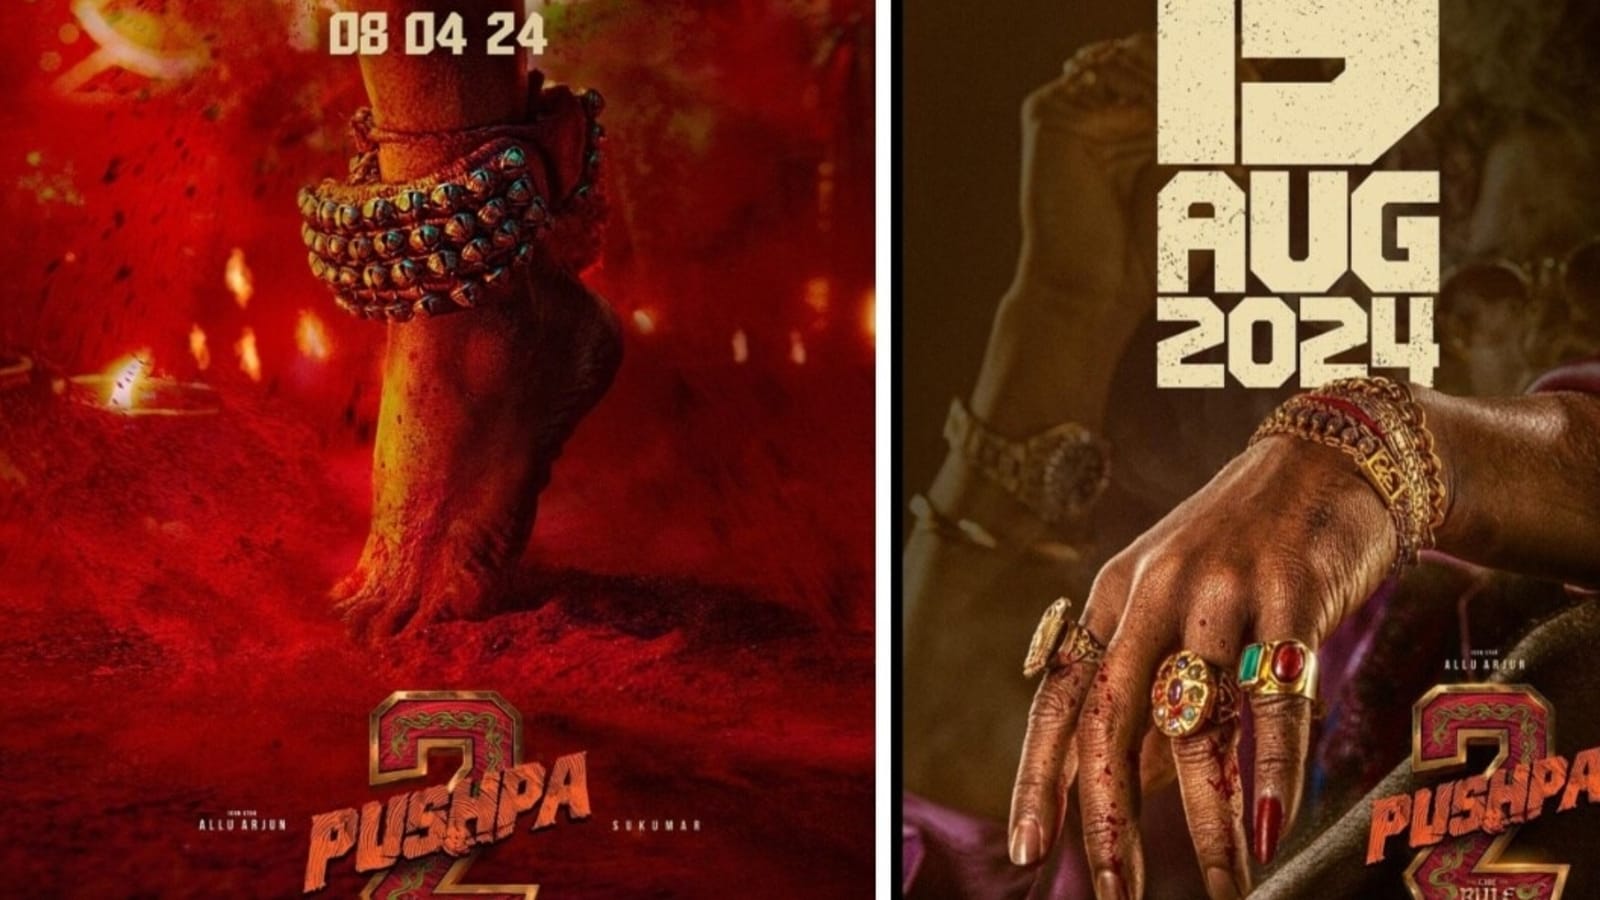 Pushpa 2 teaser release date revealed: Here are 5 things you should know about Allu Arjun's upcoming film